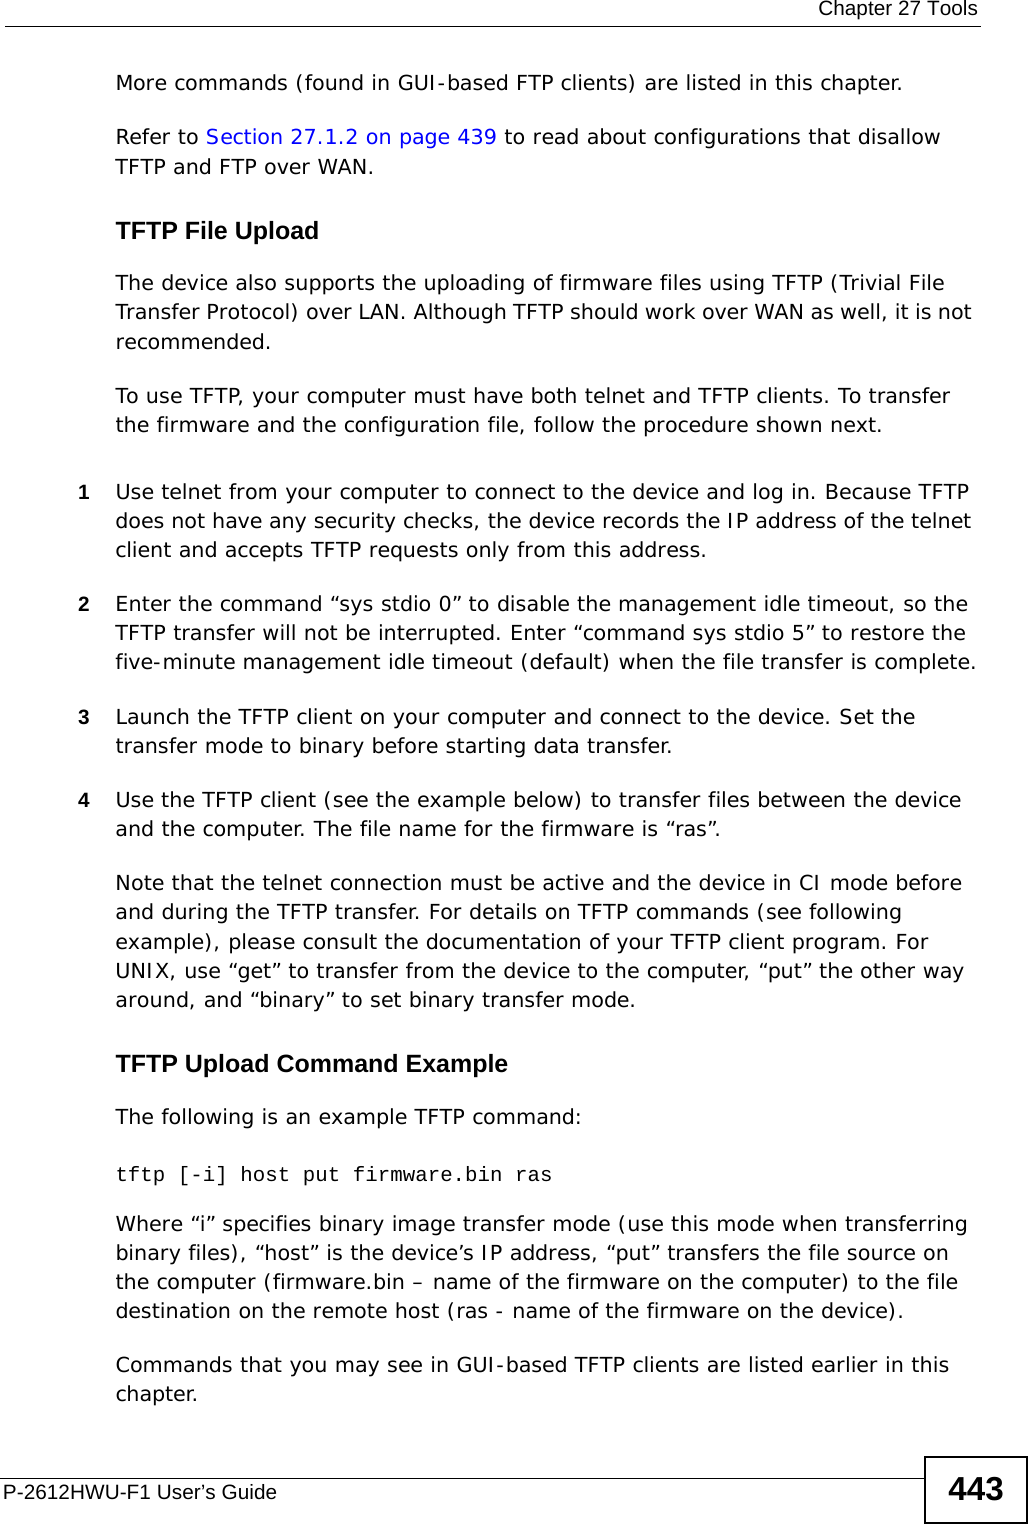  Chapter 27 ToolsP-2612HWU-F1 User’s Guide 443More commands (found in GUI-based FTP clients) are listed in this chapter.Refer to Section 27.1.2 on page 439 to read about configurations that disallow TFTP and FTP over WAN.TFTP File UploadThe device also supports the uploading of firmware files using TFTP (Trivial File Transfer Protocol) over LAN. Although TFTP should work over WAN as well, it is not recommended.To use TFTP, your computer must have both telnet and TFTP clients. To transfer the firmware and the configuration file, follow the procedure shown next.1Use telnet from your computer to connect to the device and log in. Because TFTP does not have any security checks, the device records the IP address of the telnet client and accepts TFTP requests only from this address.2Enter the command “sys stdio 0” to disable the management idle timeout, so the TFTP transfer will not be interrupted. Enter “command sys stdio 5” to restore the five-minute management idle timeout (default) when the file transfer is complete.3Launch the TFTP client on your computer and connect to the device. Set the transfer mode to binary before starting data transfer.4Use the TFTP client (see the example below) to transfer files between the device and the computer. The file name for the firmware is “ras”.Note that the telnet connection must be active and the device in CI mode before and during the TFTP transfer. For details on TFTP commands (see following example), please consult the documentation of your TFTP client program. For UNIX, use “get” to transfer from the device to the computer, “put” the other way around, and “binary” to set binary transfer mode.TFTP Upload Command ExampleThe following is an example TFTP command:tftp [-i] host put firmware.bin rasWhere “i” specifies binary image transfer mode (use this mode when transferring binary files), “host” is the device’s IP address, “put” transfers the file source on the computer (firmware.bin – name of the firmware on the computer) to the file destination on the remote host (ras - name of the firmware on the device).Commands that you may see in GUI-based TFTP clients are listed earlier in this chapter.